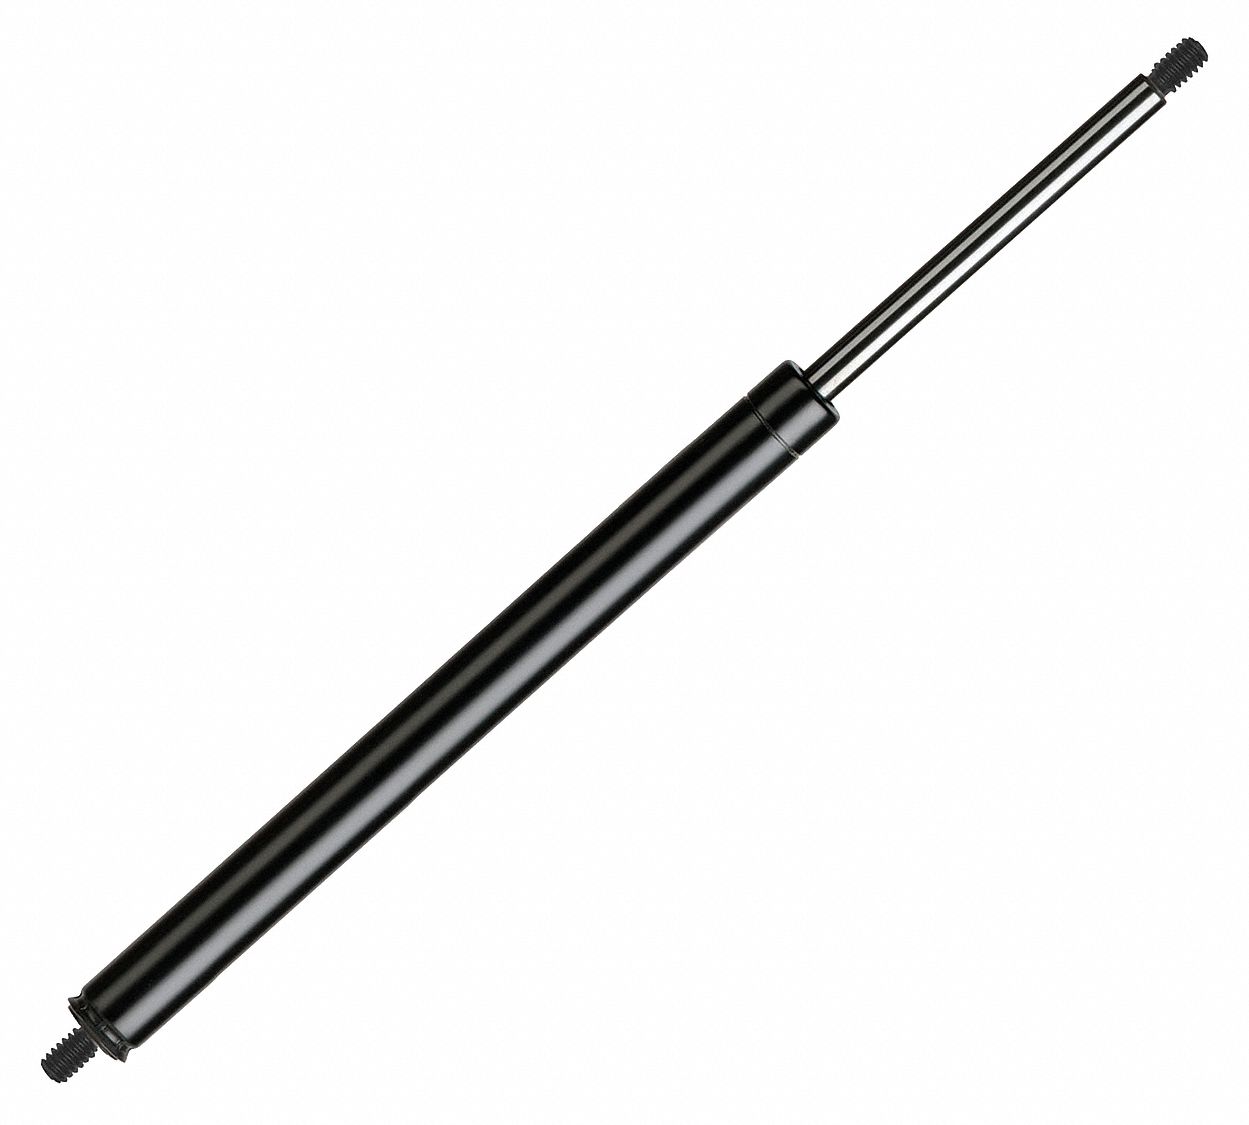 Extension Strut: Mechanical Traction, 9 to 27 lb, Carbon Steel, M6x1 Rod Thread Size